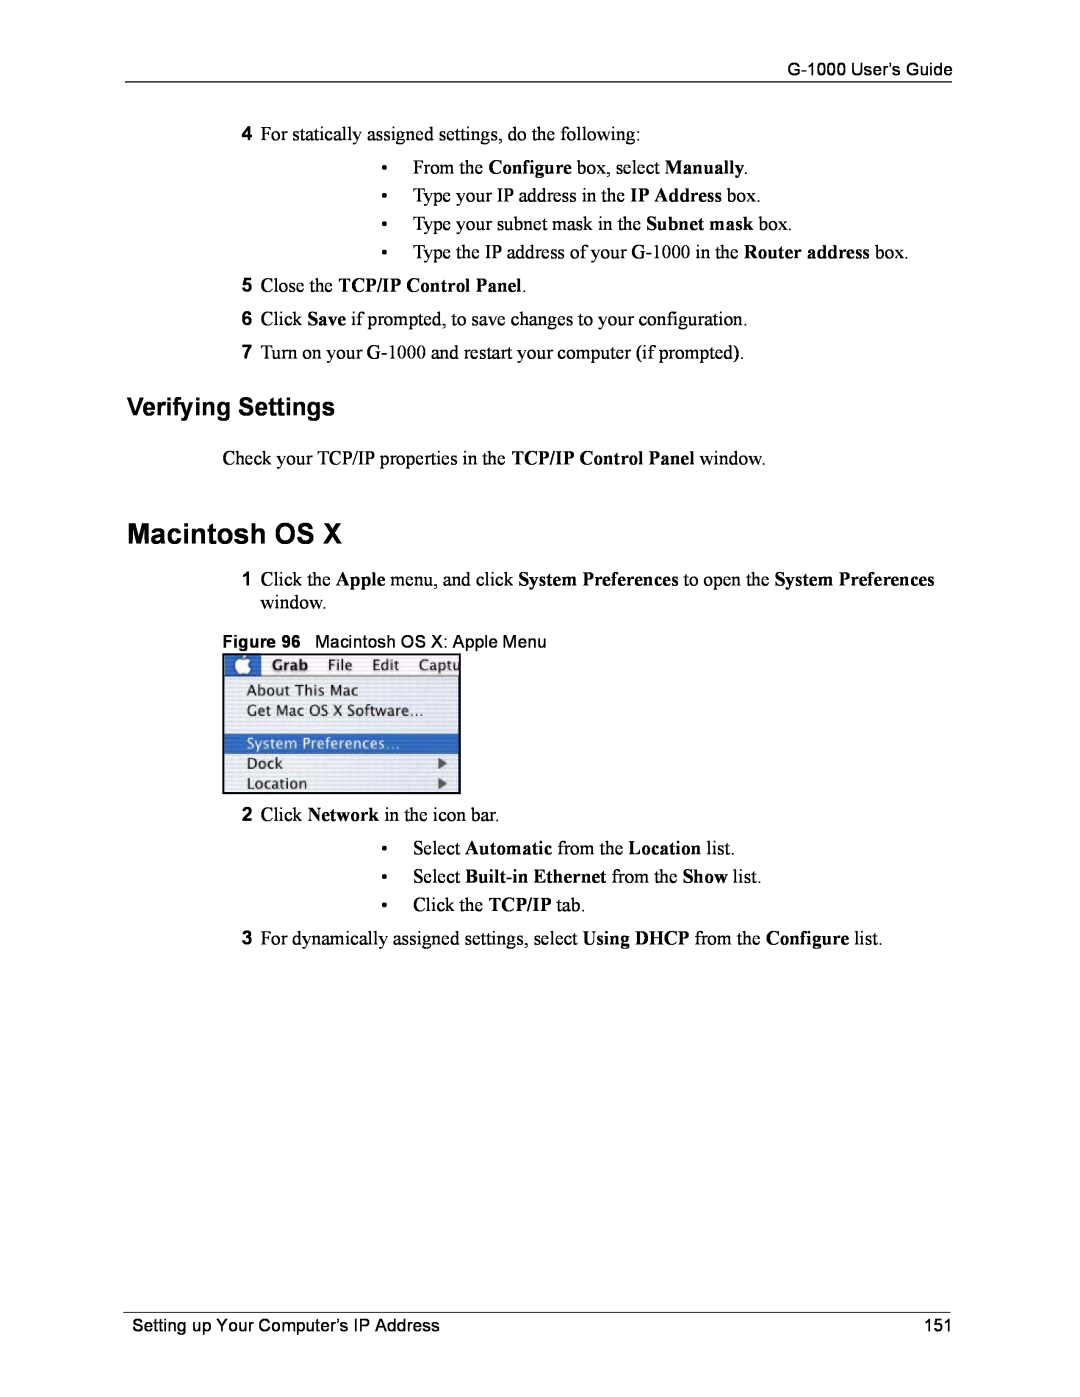 ZyXEL Communications G-1000 manual Macintosh OS, Verifying Settings, Close the TCP/IP Control Panel 